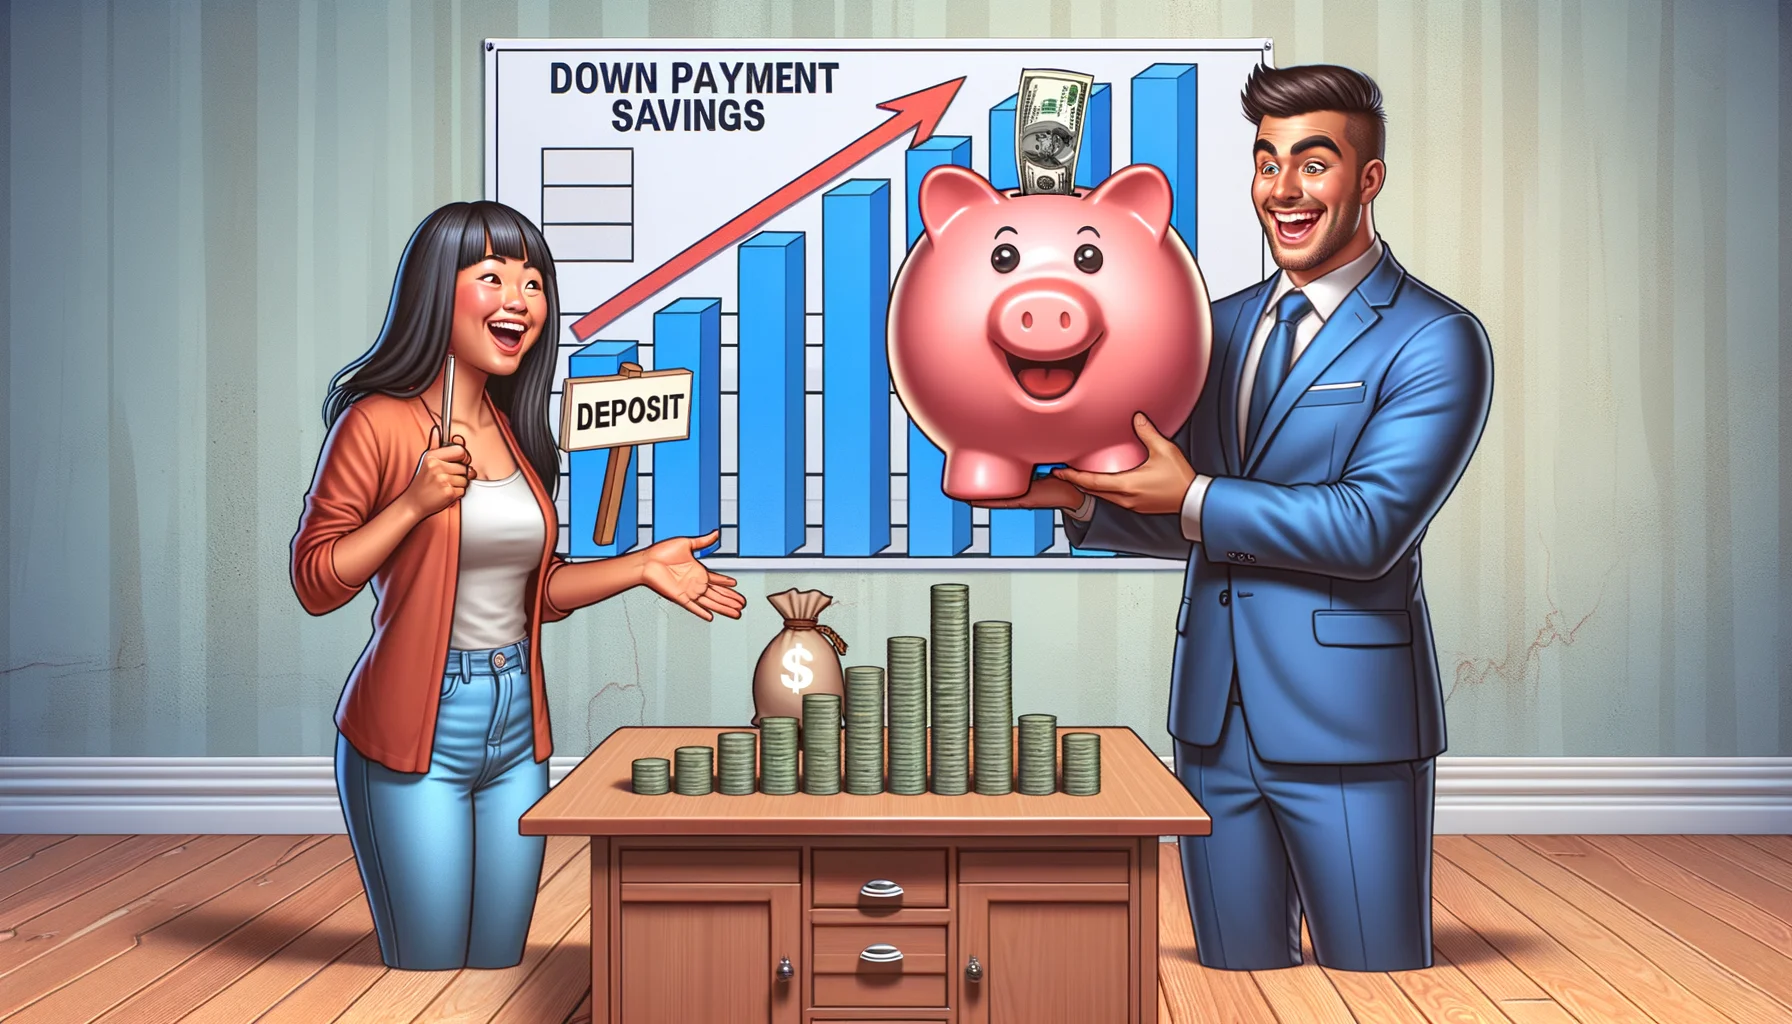 Create a humorous, realistic image that vividly illustrates the most ideal scenario for down payment savings strategies. Show a cheerful real estate agent of Hispanic descent presenting, with excitement, a large piggy bank full of money with a 'Deposit' sign on it to a delighted Asian female first-time home buyer. In the background, there's an oversized bar chart depicting the increased savings over a timeline. All these are presented in a light-hearted environment, with characters exuding happiness and contentment, truly representing the power of successful savings strategies.